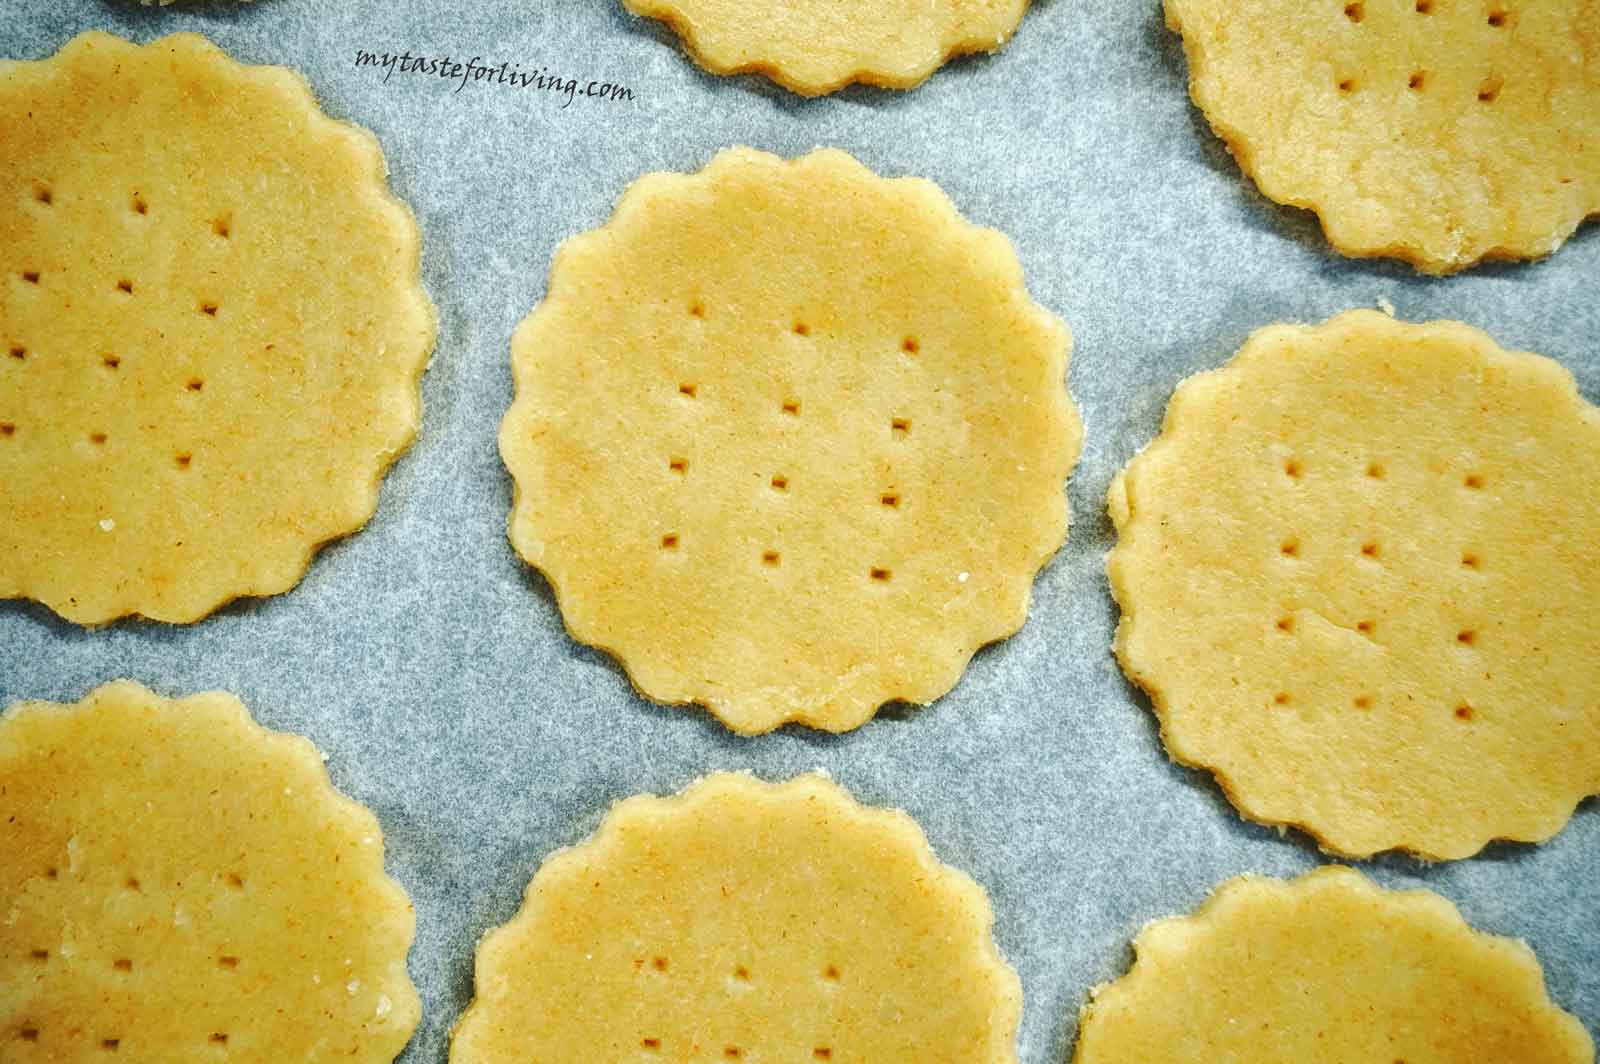 Crispy parmesan crackers with cheddar and white spelt flour. You can replace cheddar with yellow cheese and spelt flour with white flour. If desired, you can season them with a spice of your choice such as paprika, savory, oregano, thyme or basil.